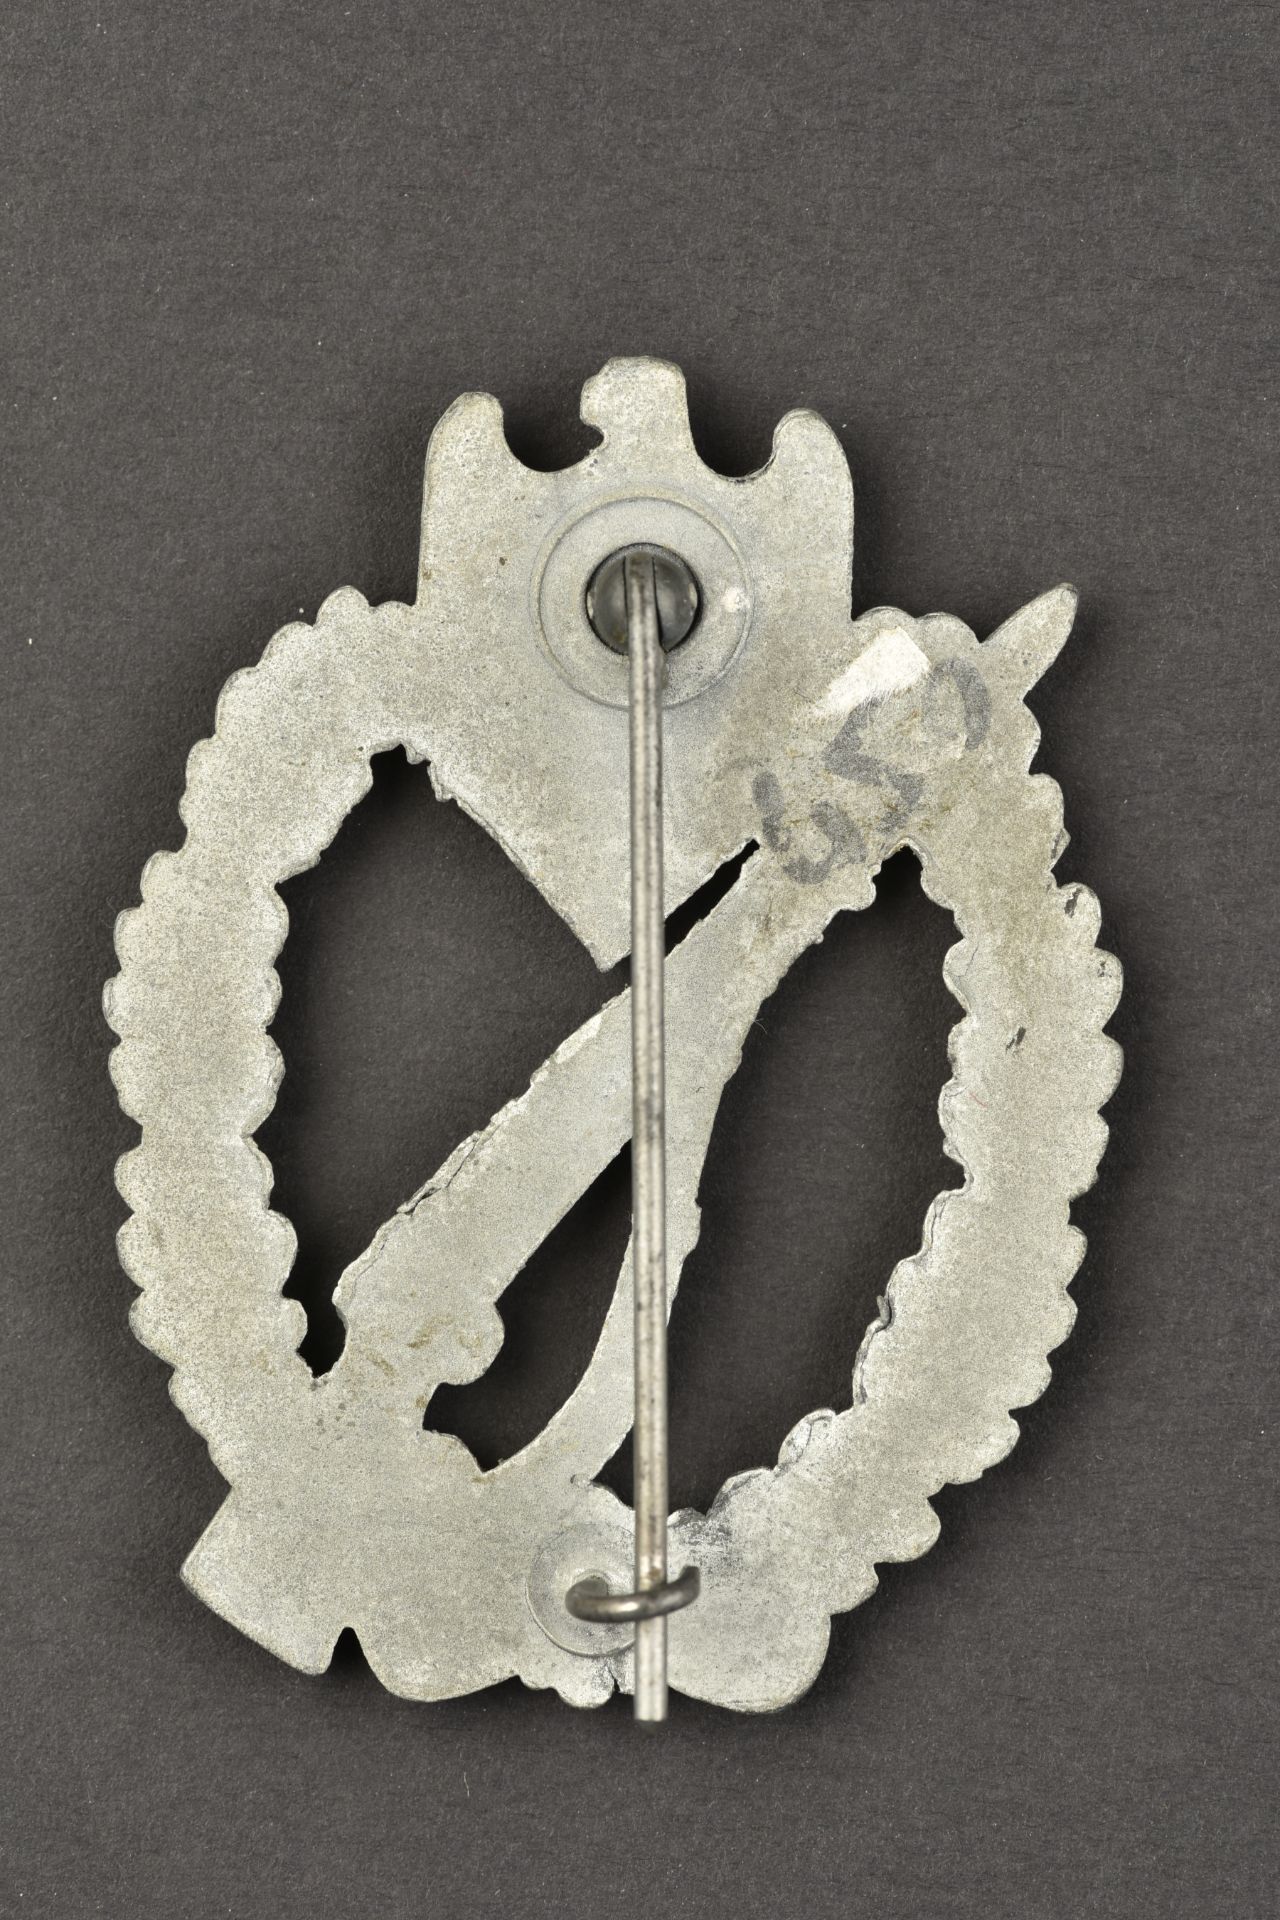 Infanterie Abzeichen. Infantry Badge. - Image 2 of 2